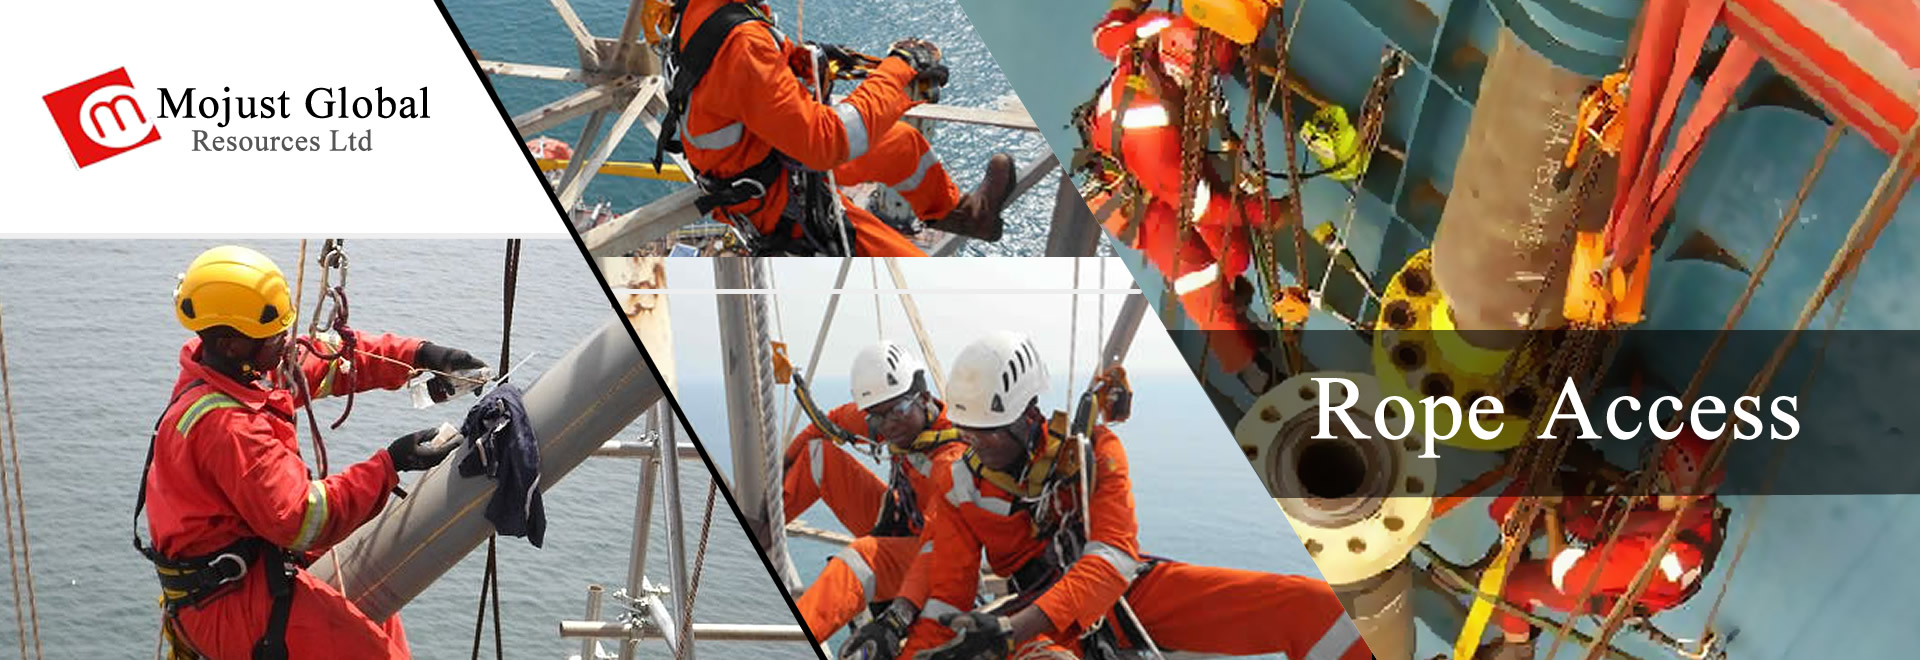 rope-access-services